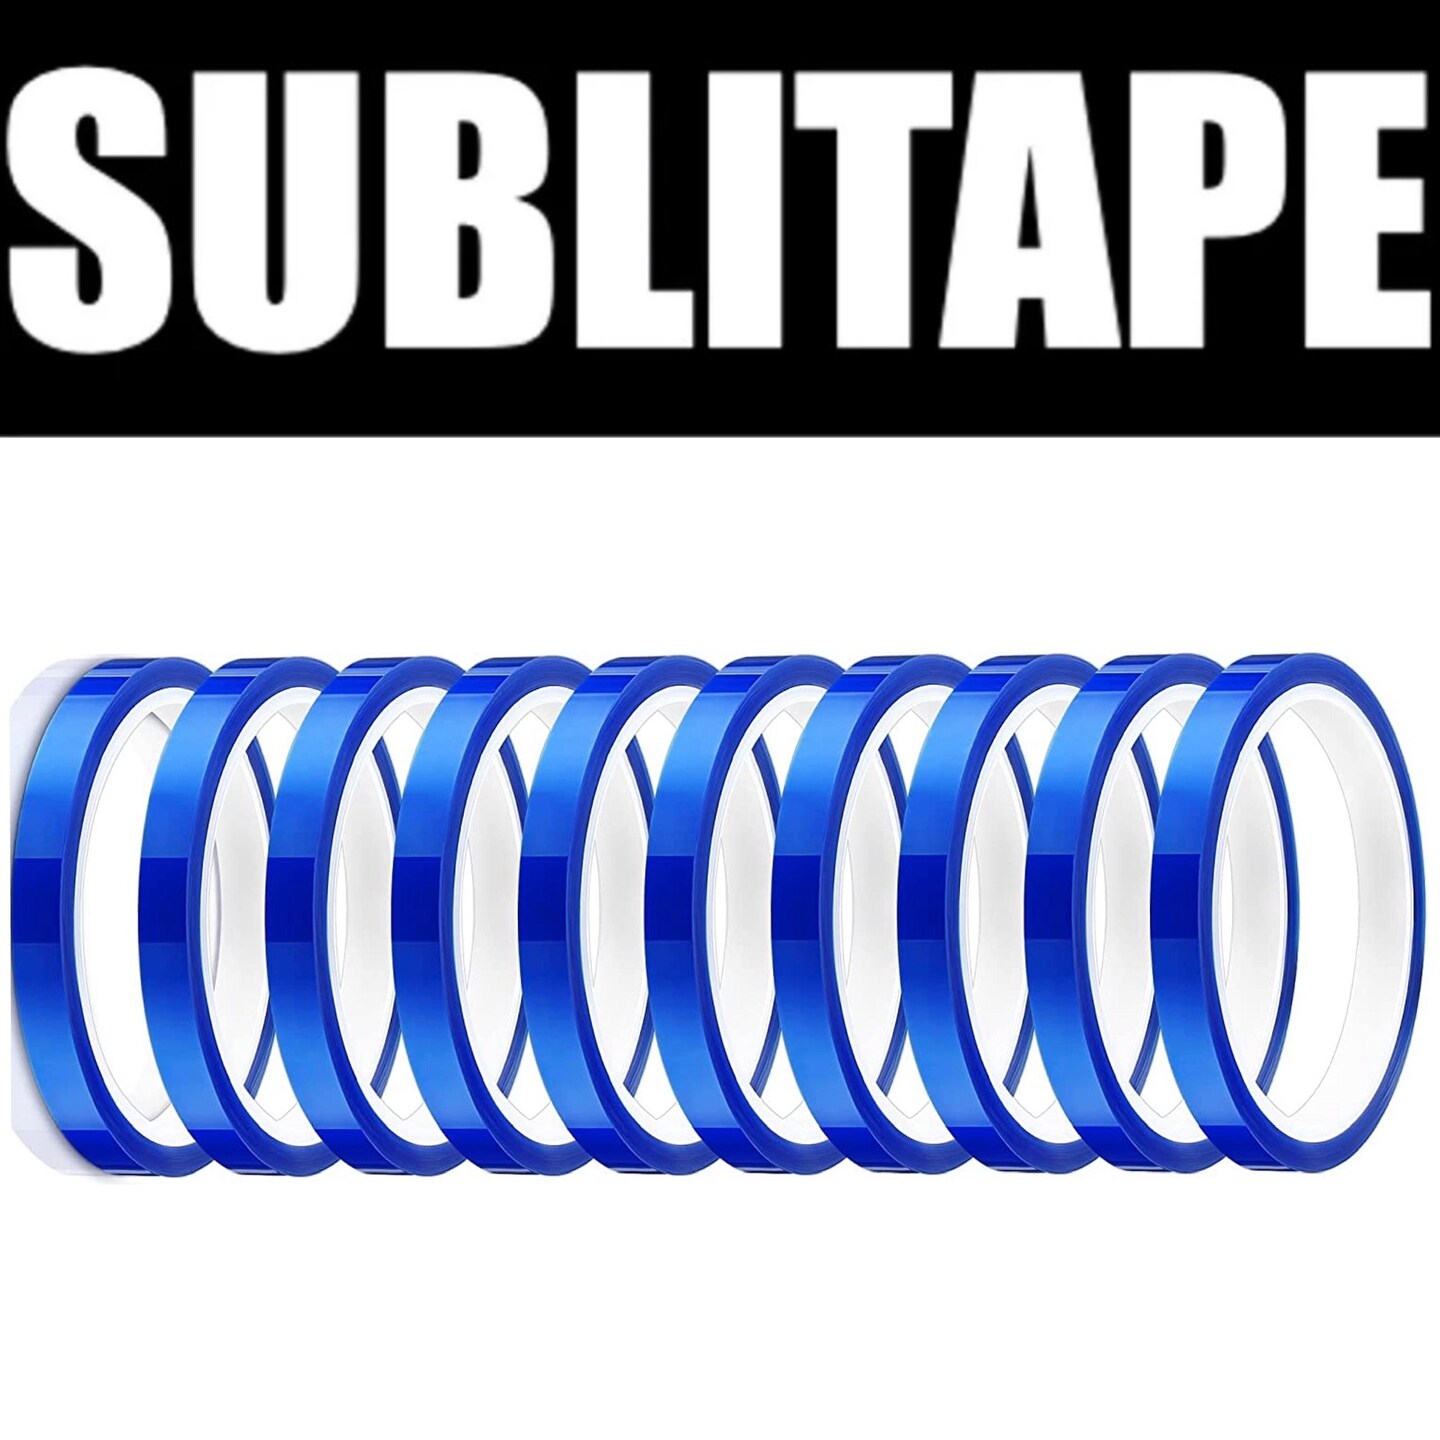 10 rolls Heat resistant tapes sublimation Press Transfer Thermal Tape 4mmx30m SUBLITAPE BLUE